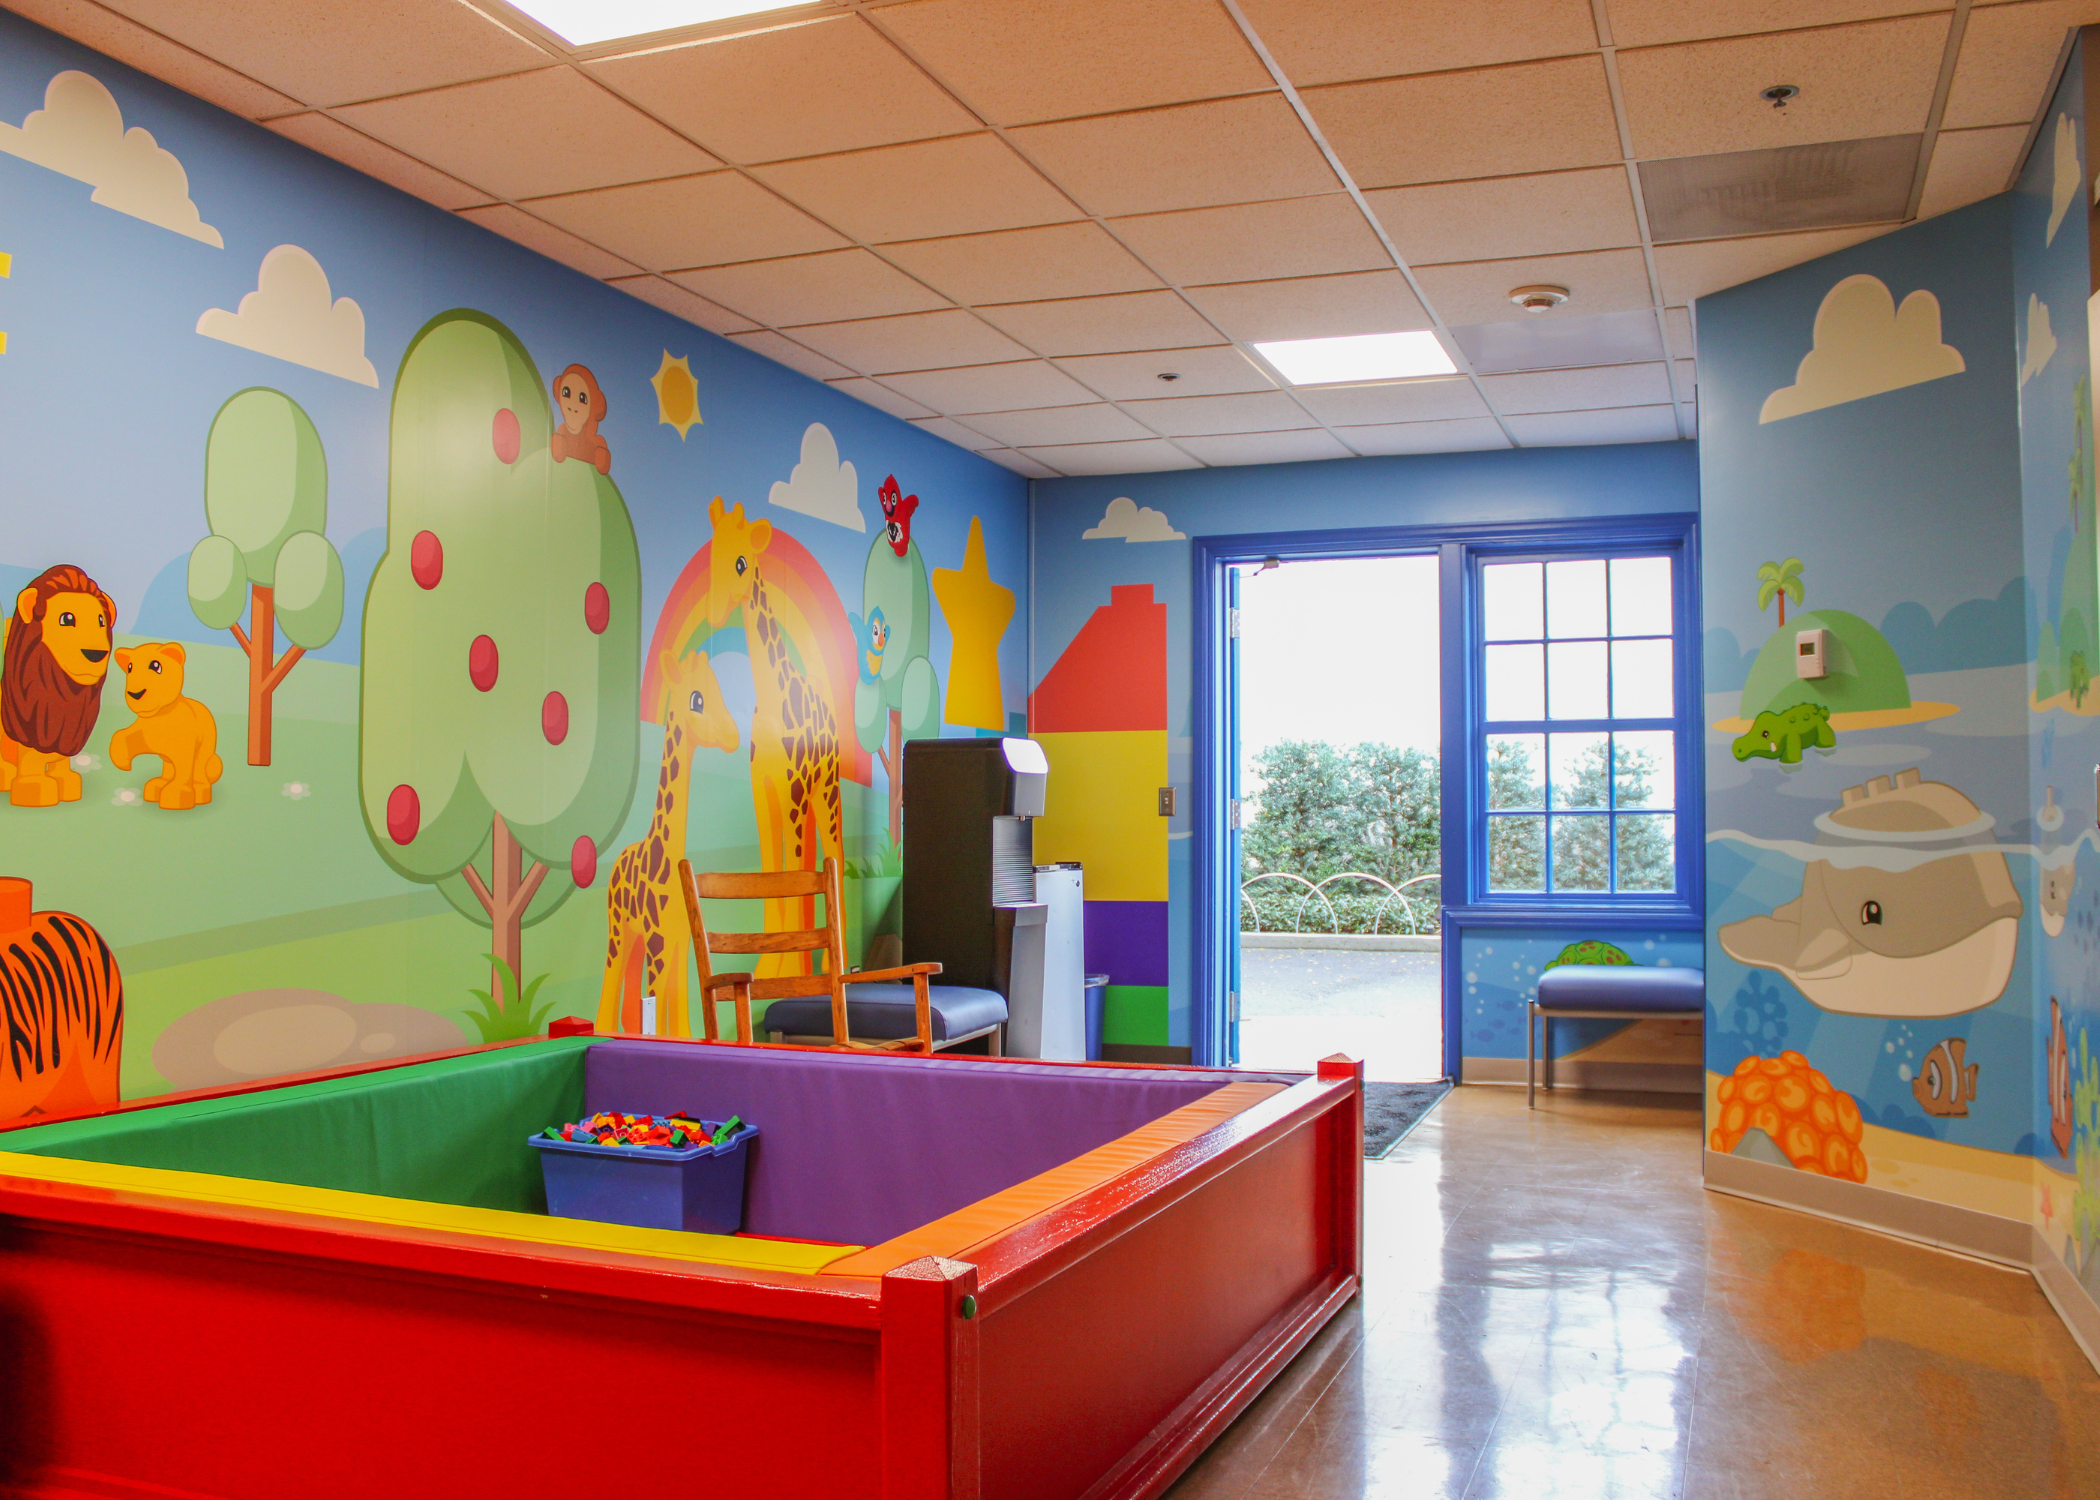 Baby Care Center 7X5